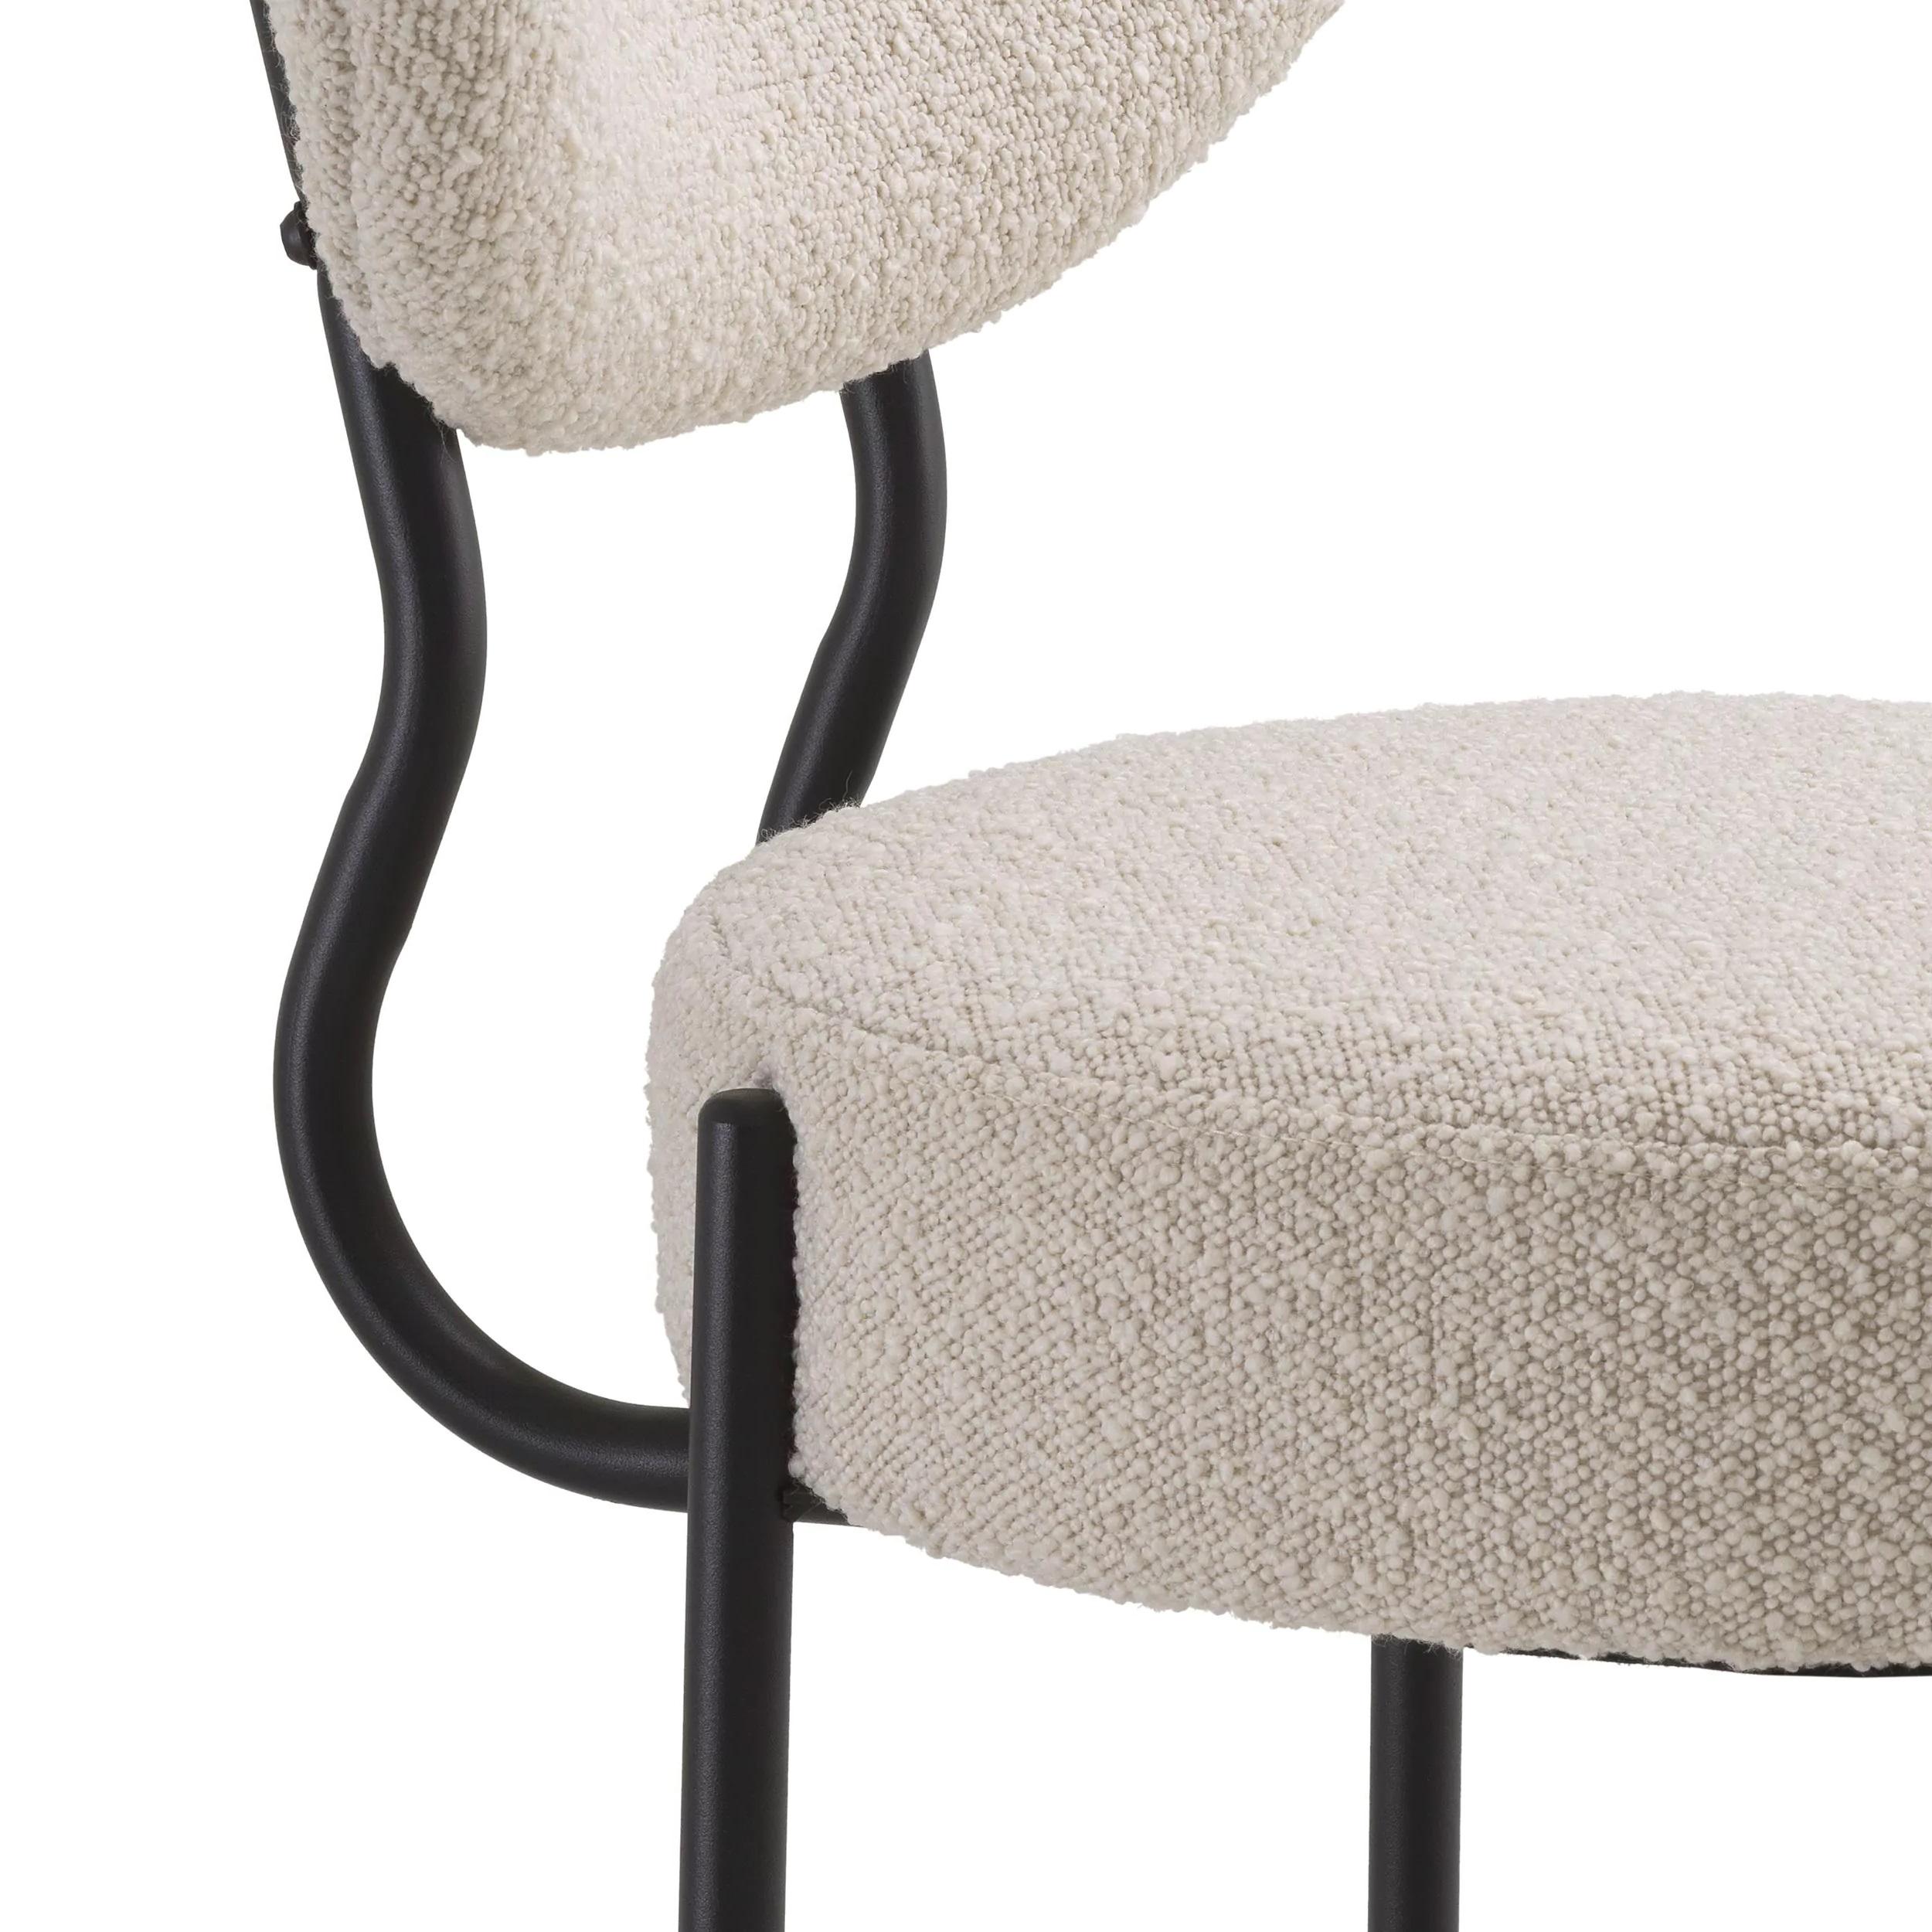 1950s Design And MCM Style Beige Bouclé Fabric And Black Metal Dining Chair.